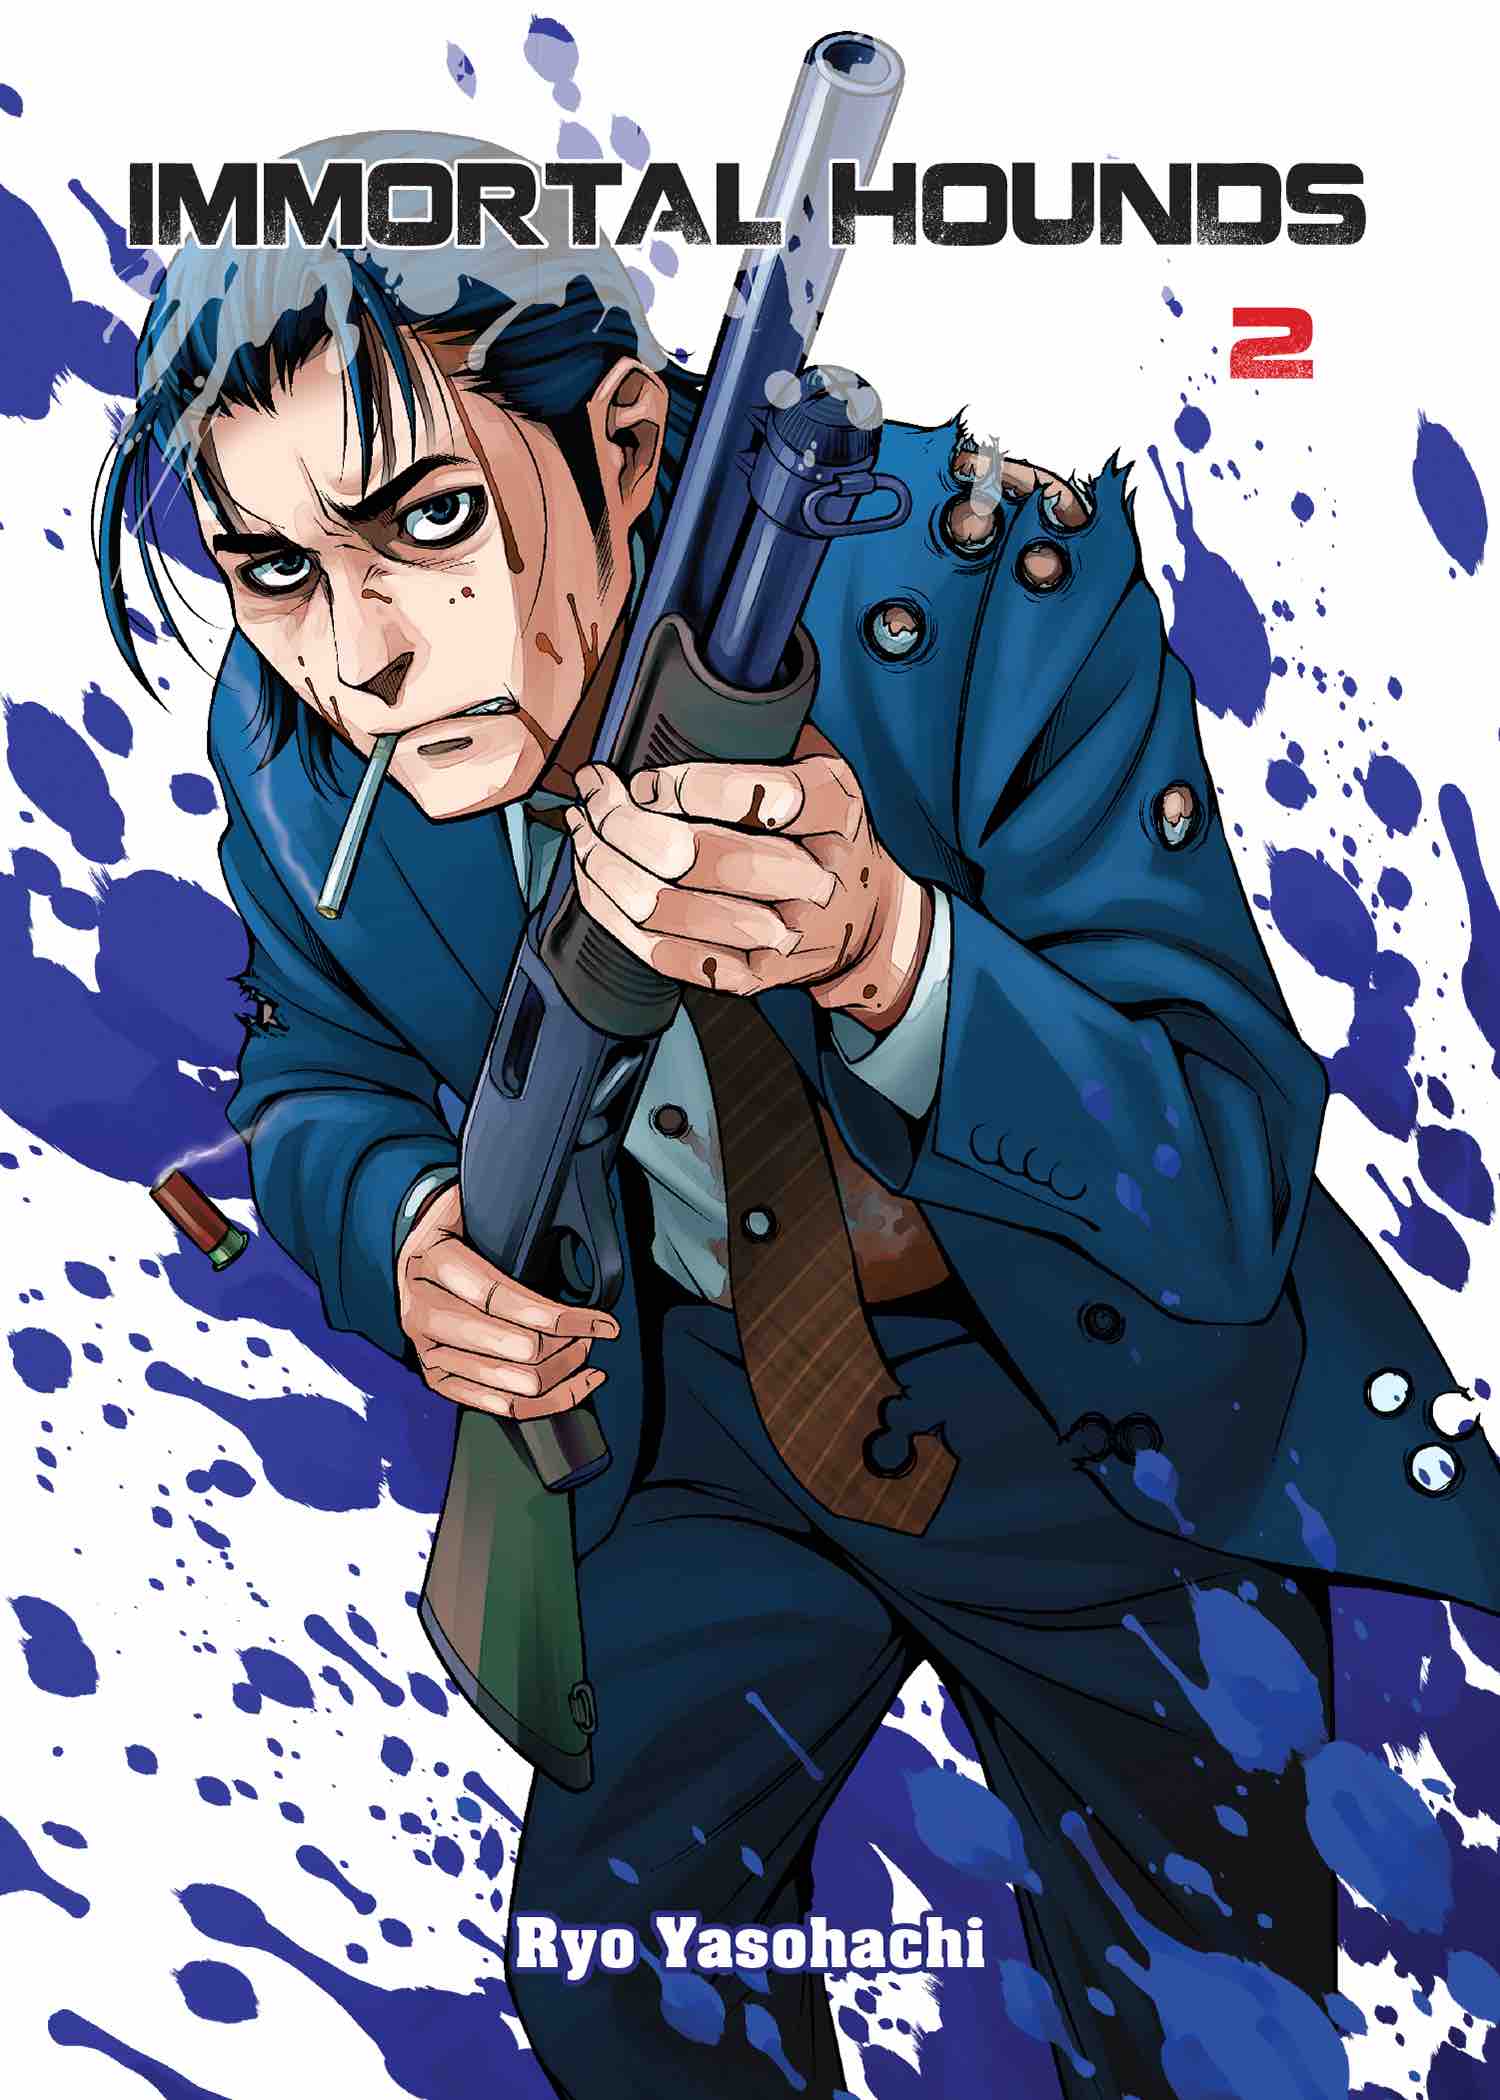 October 2016 Manga Releases Cover for Immortal Hounds.